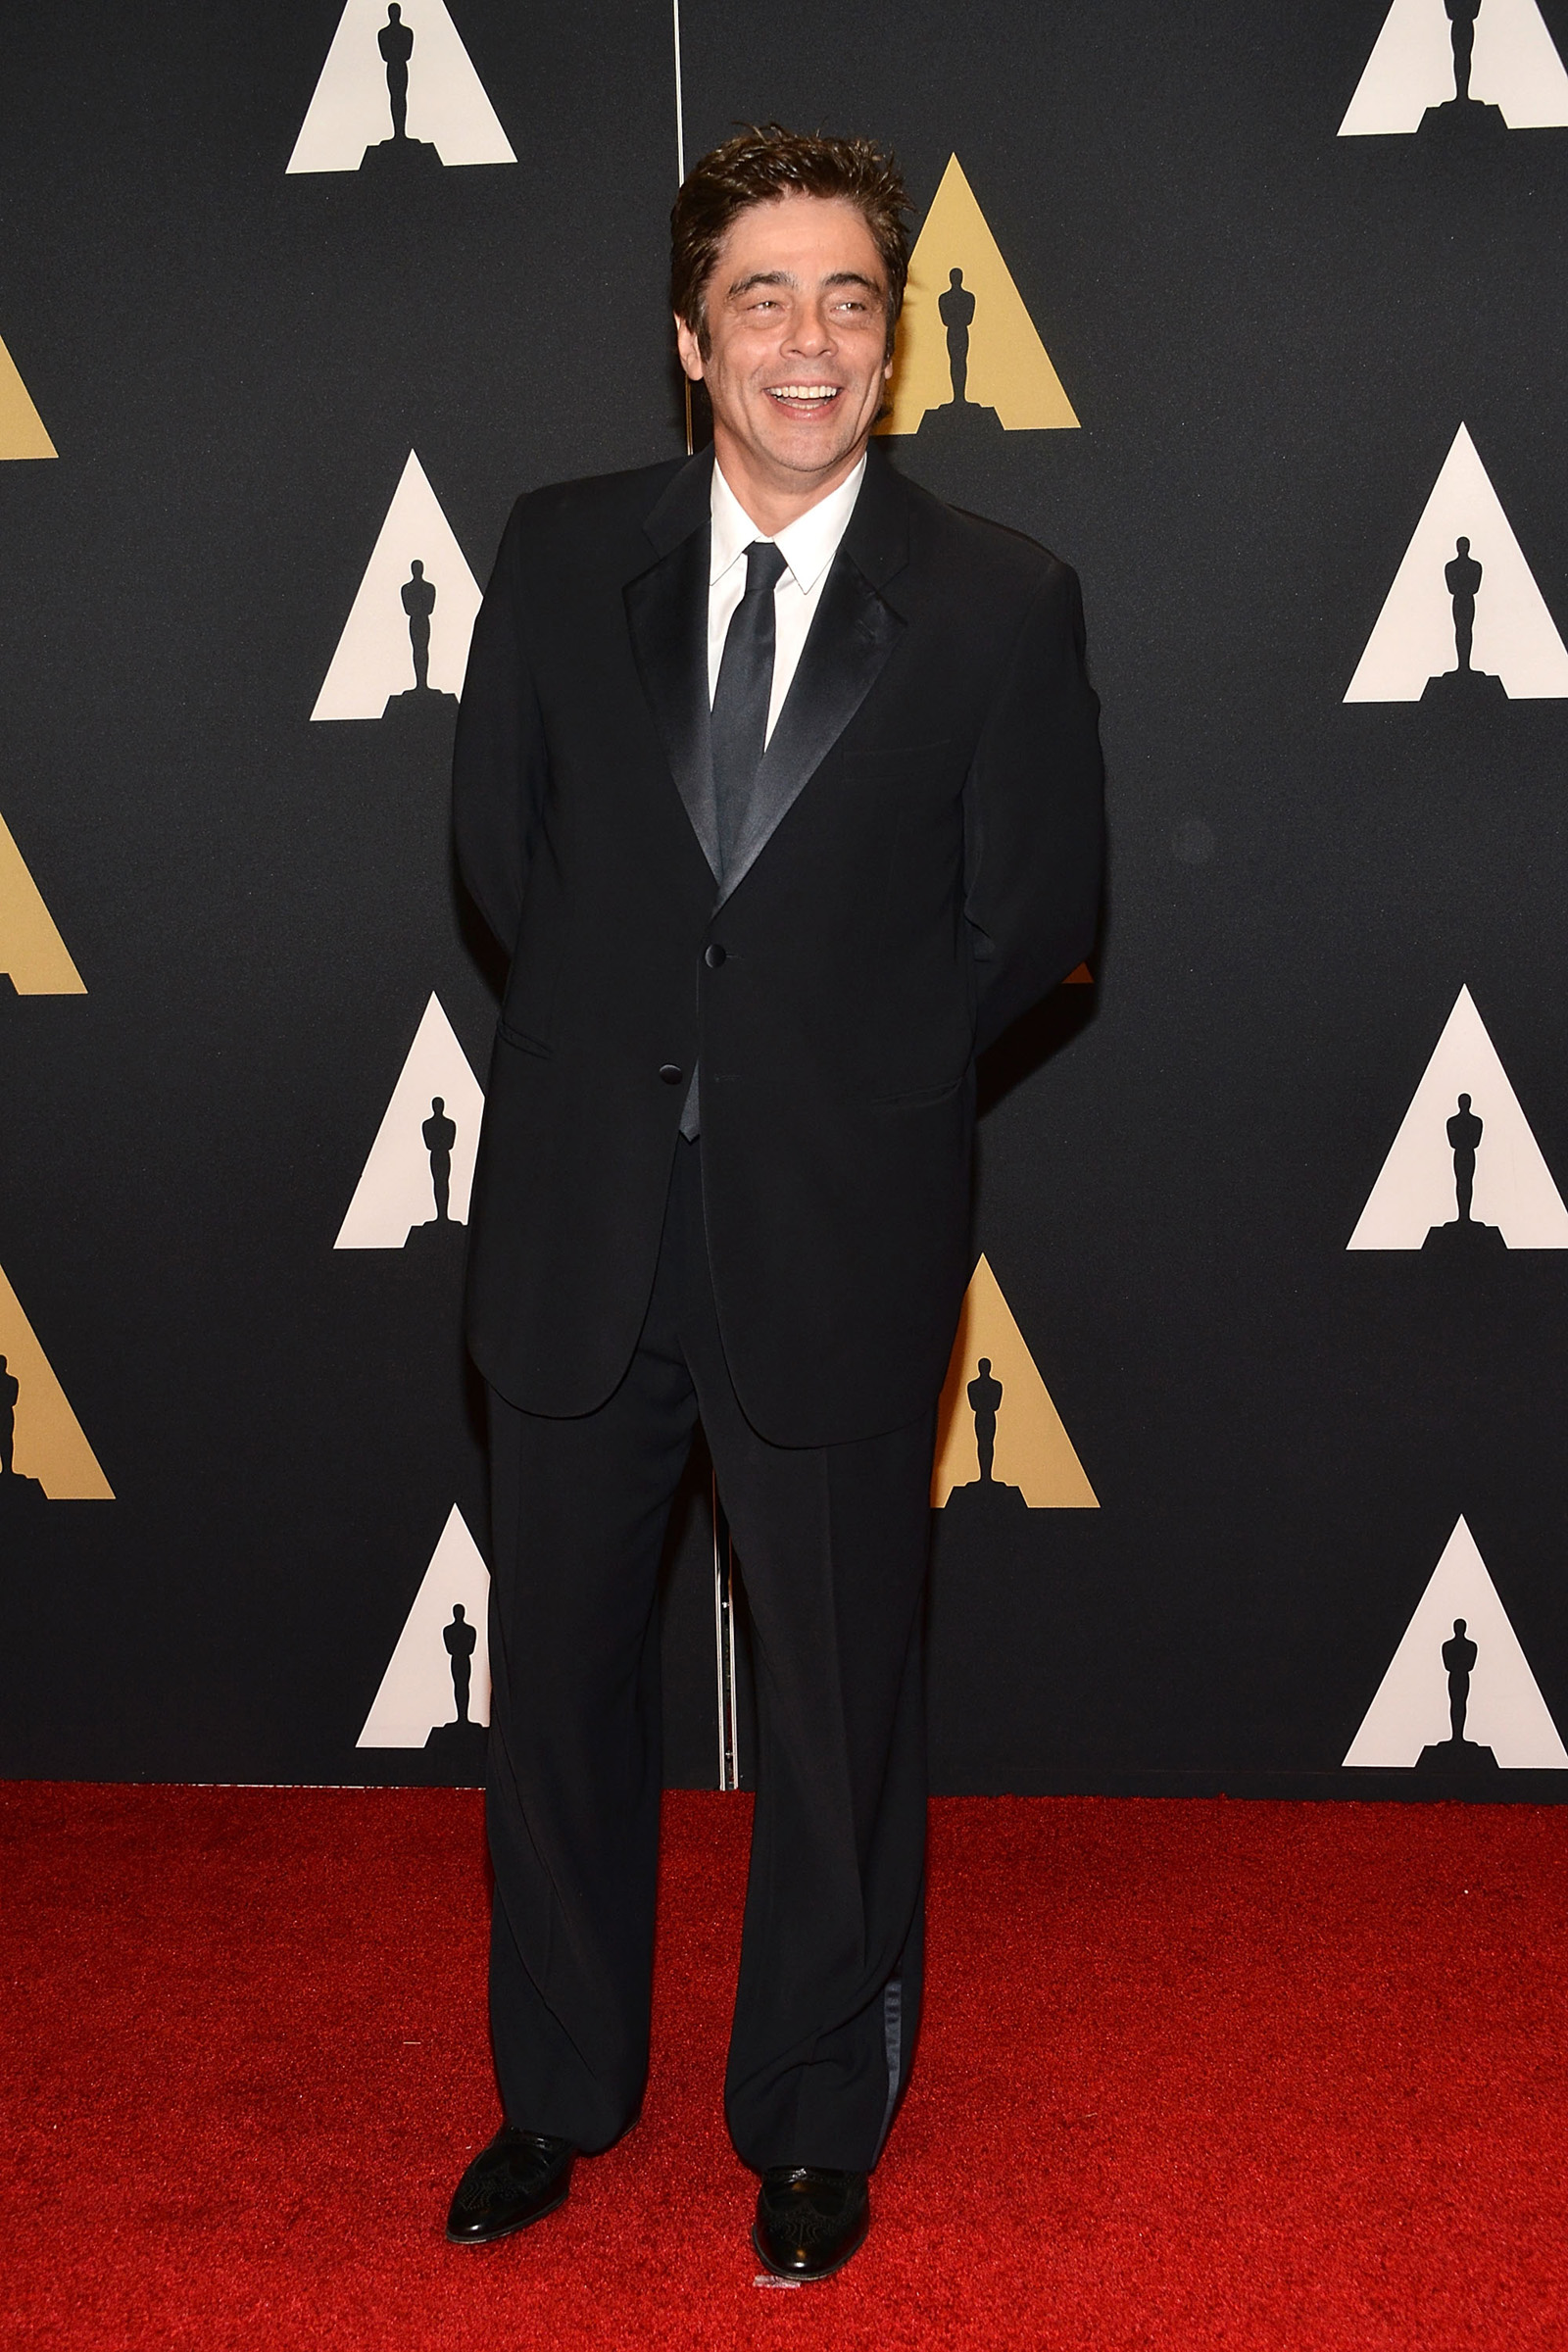 HOLLYWOOD, CA - NOVEMBER 14:  Benicio del Toro attends the Academy of Motion Picture Arts and Sciences' 7th Annual Governors Awards at The Ray Dolby Ballroom at Hollywood & Highland Center on November 14, 2015 in Hollywood, California.  (Photo by Araya Diaz/WireImage)